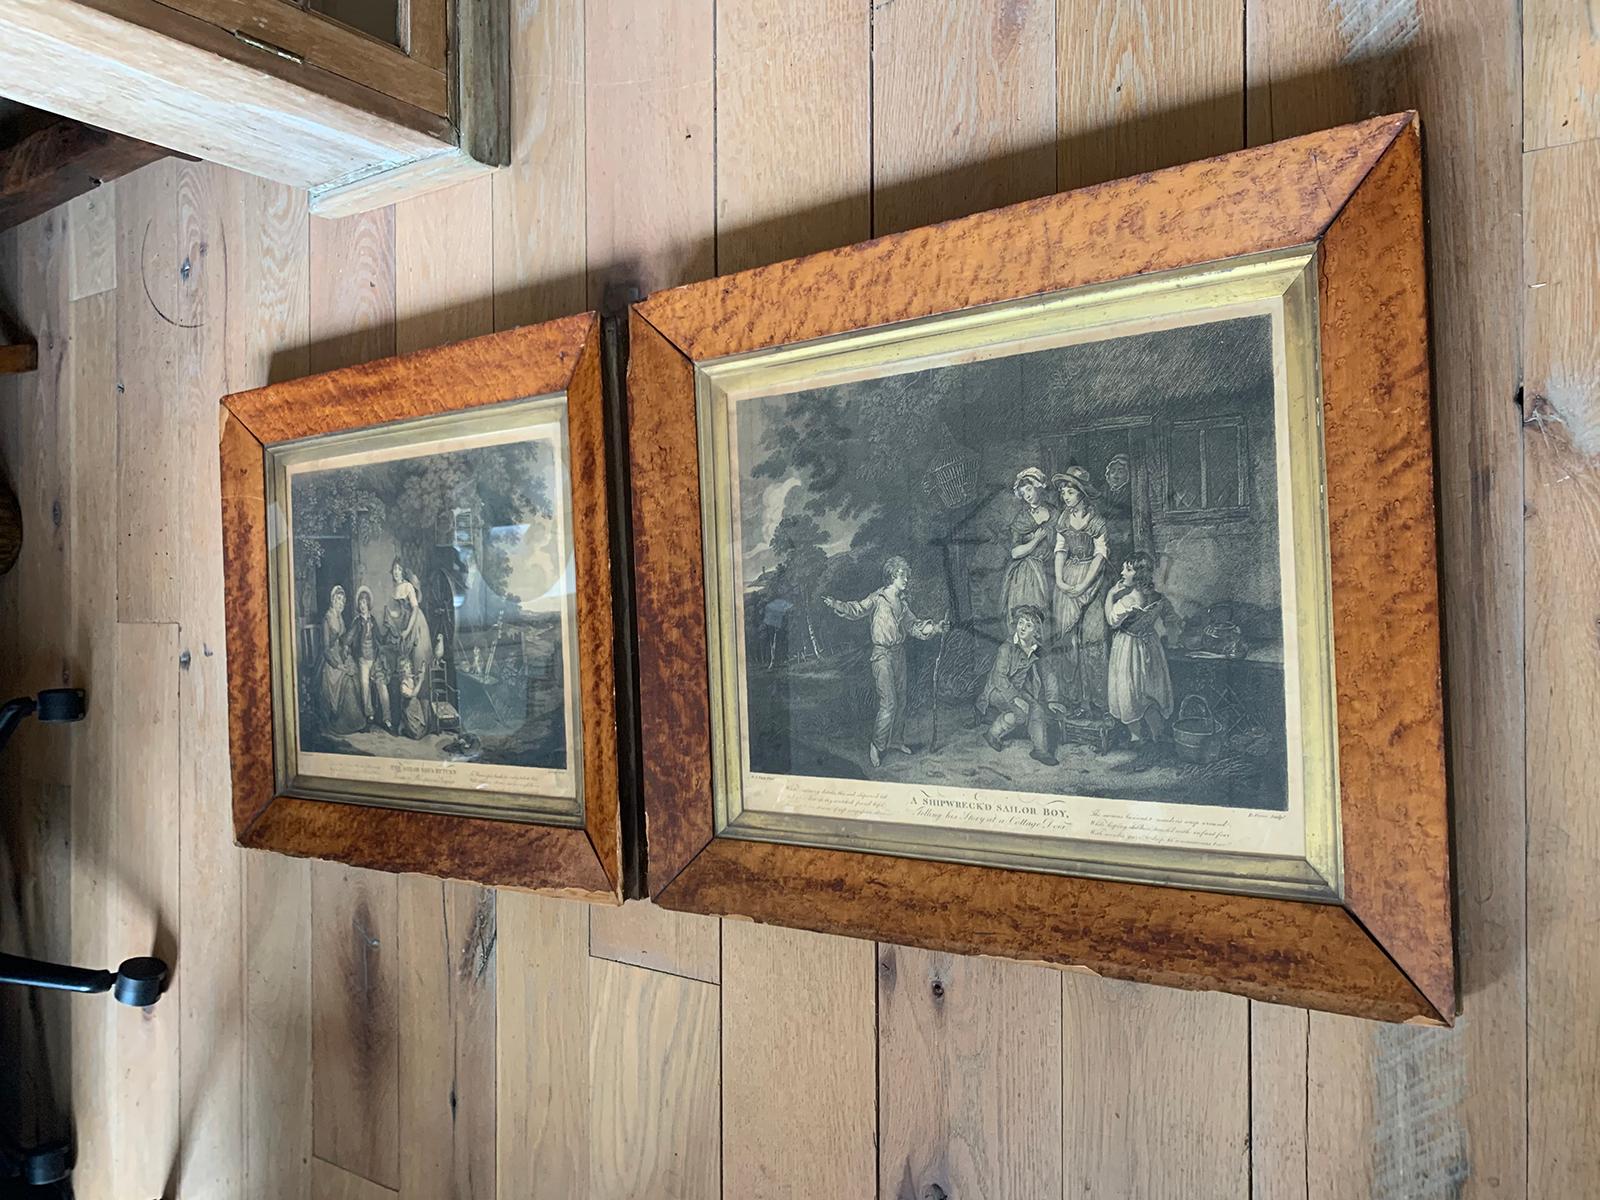 Pair of English engravings of sailor boys by Edward Orme in burled wood frames, circa 1790-1800
After original paintings by William Redmore Bigg, titled 